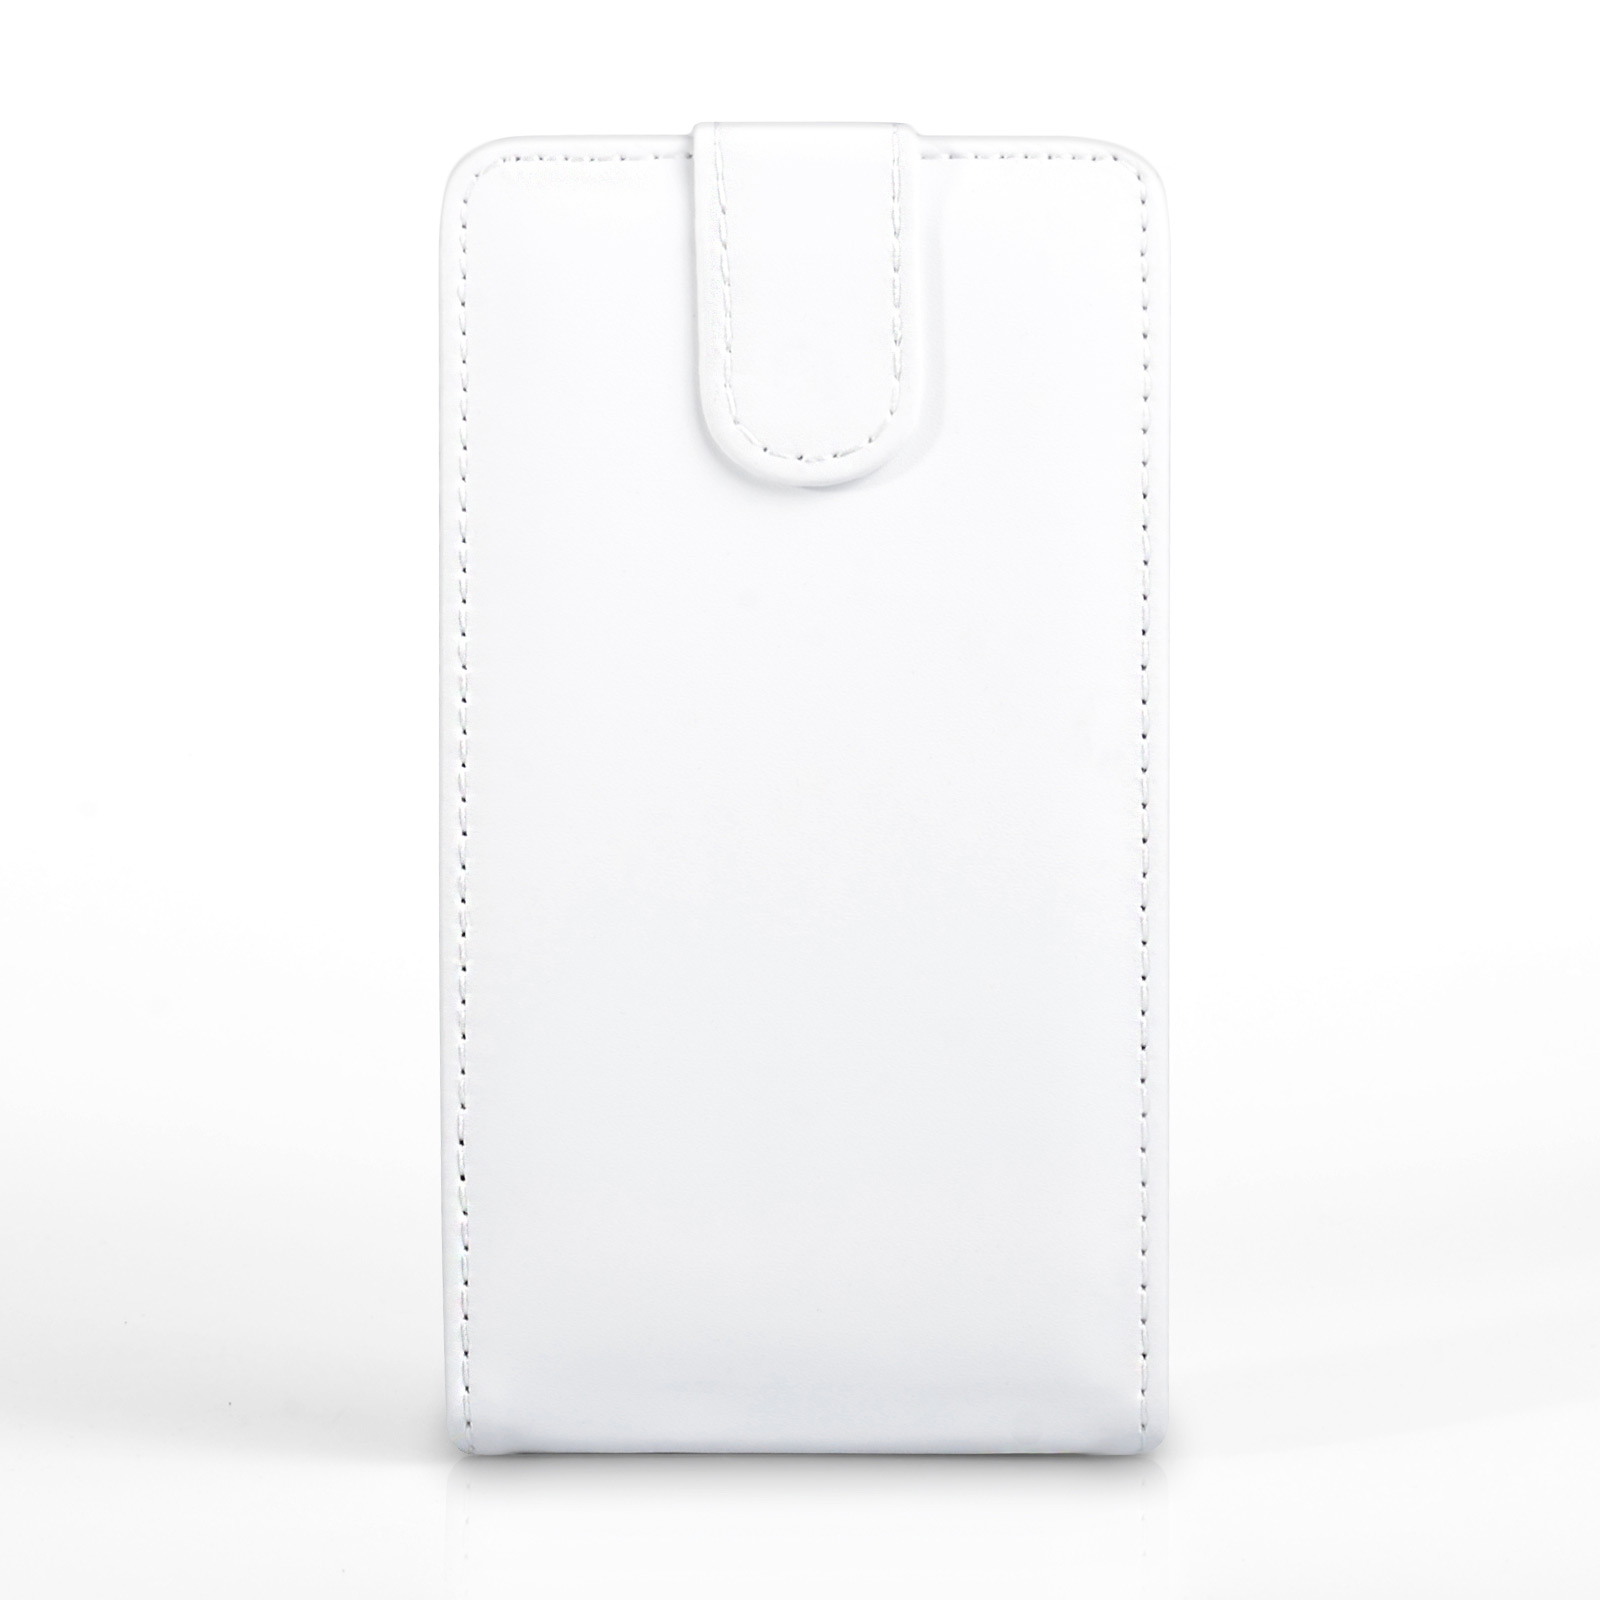 YouSave Samsung Galaxy Note 3 Neo Leather-Effect Flip Case - White